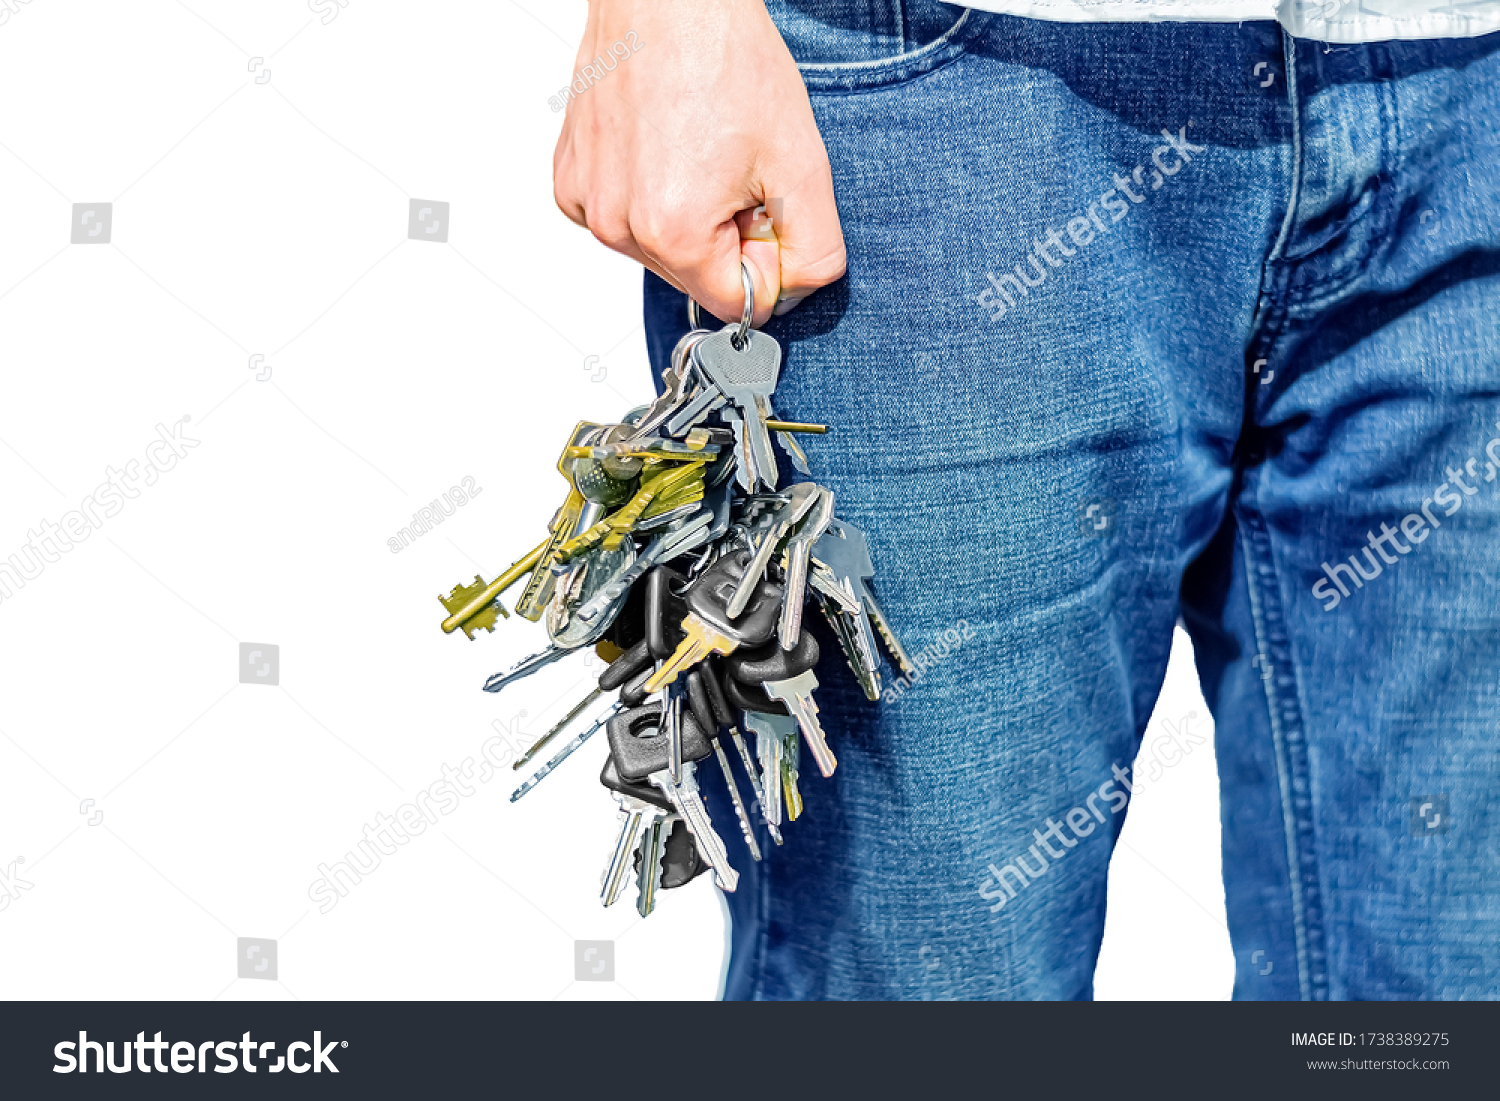 big bunch of keys in my jeans hand #1738389275